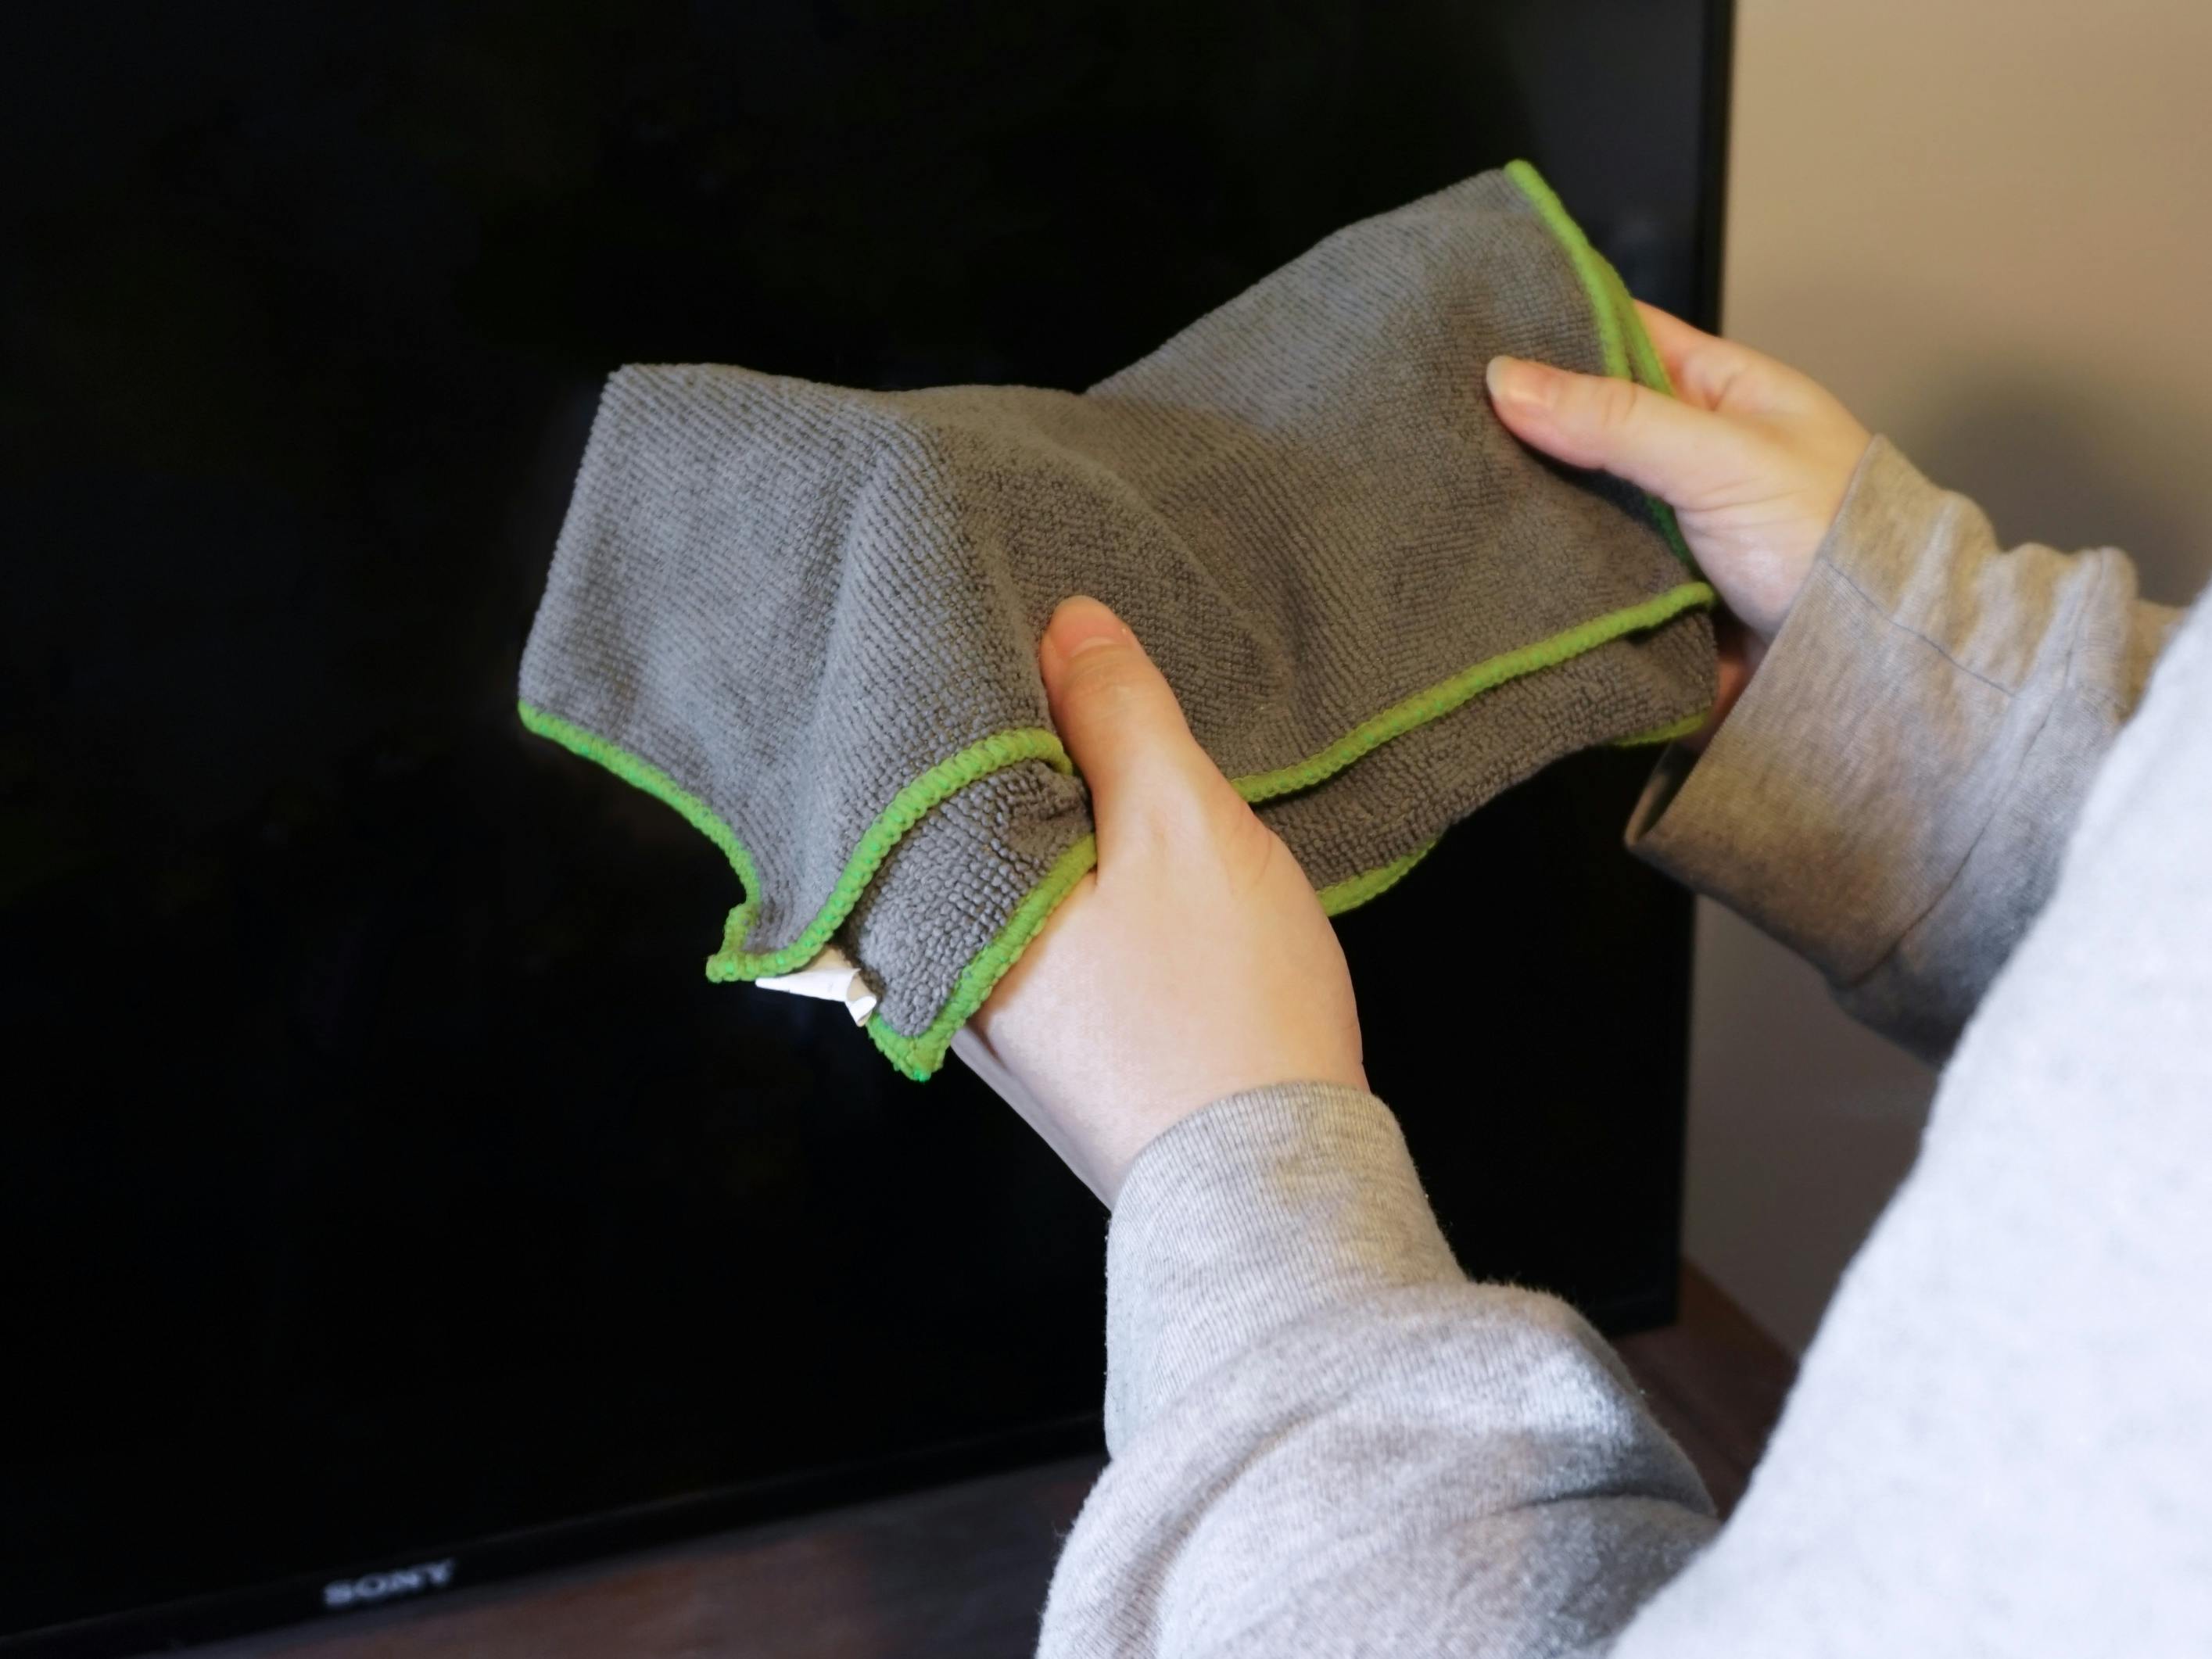 Someone holding a microfiber cloth, getting ready to clean their TV